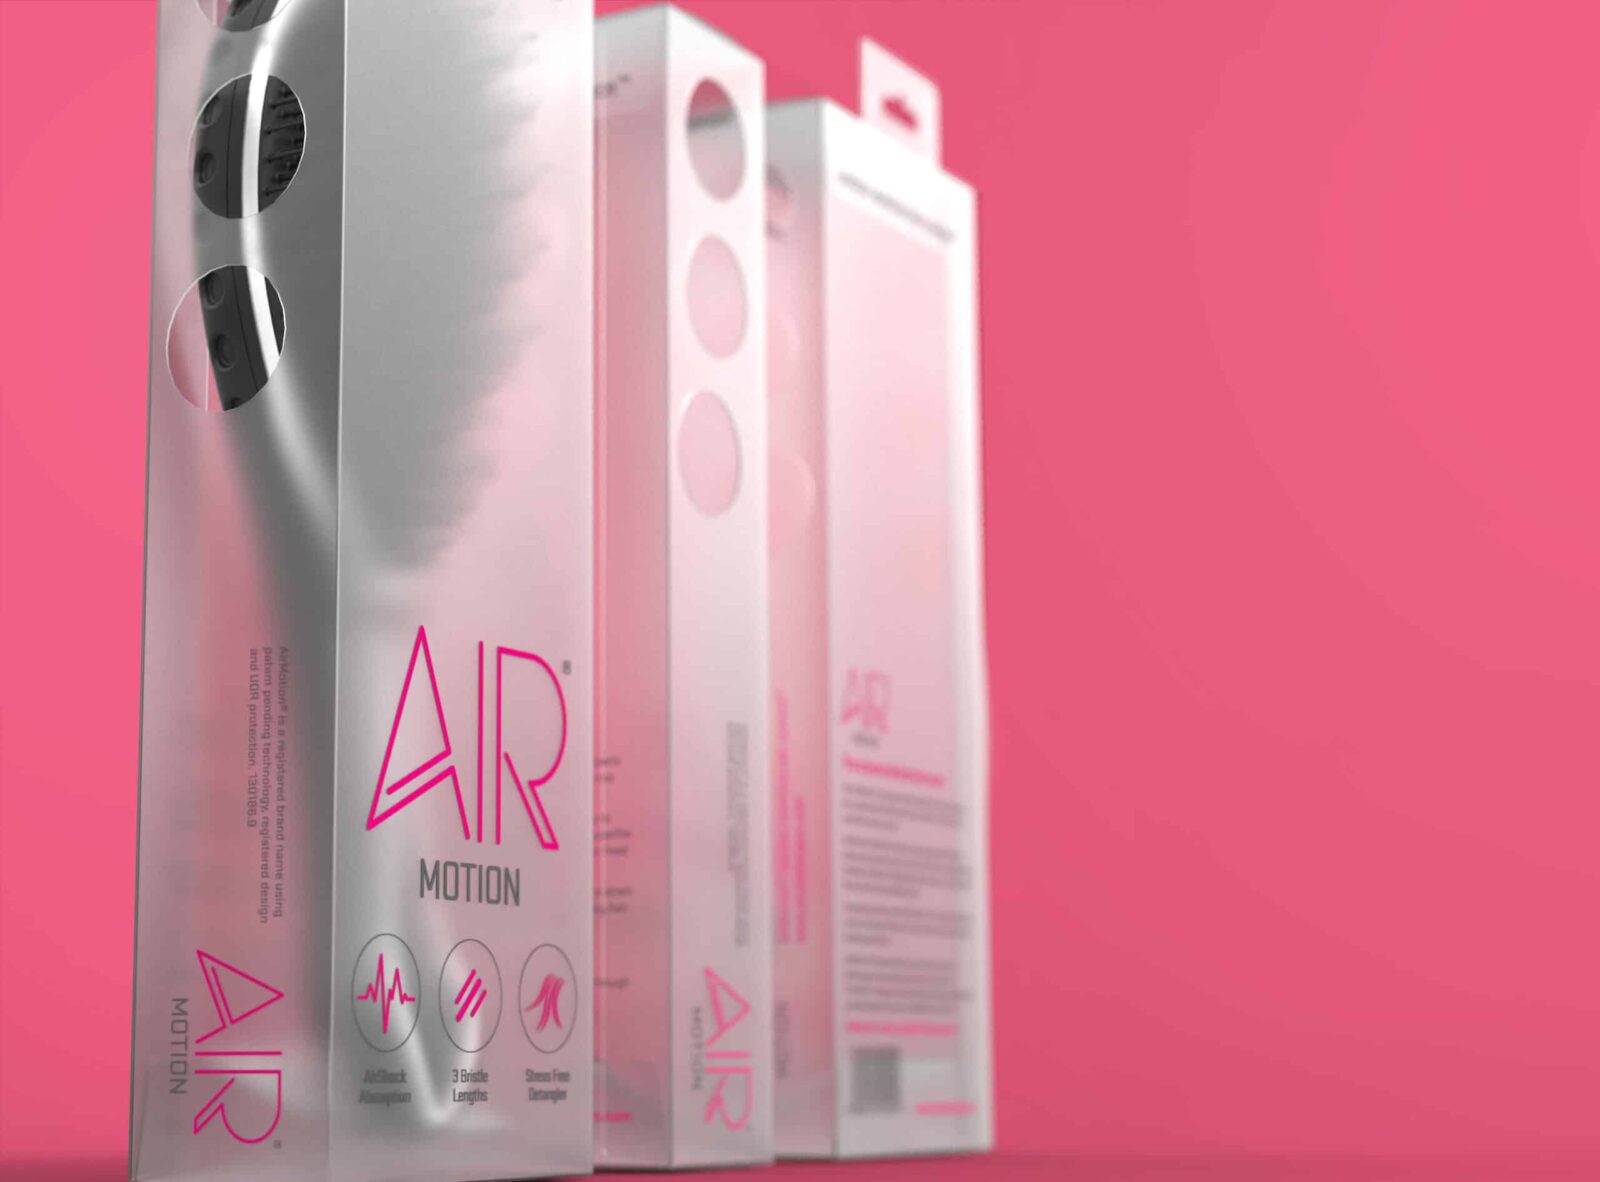 Packaging design for the Air Motion Hairbrush